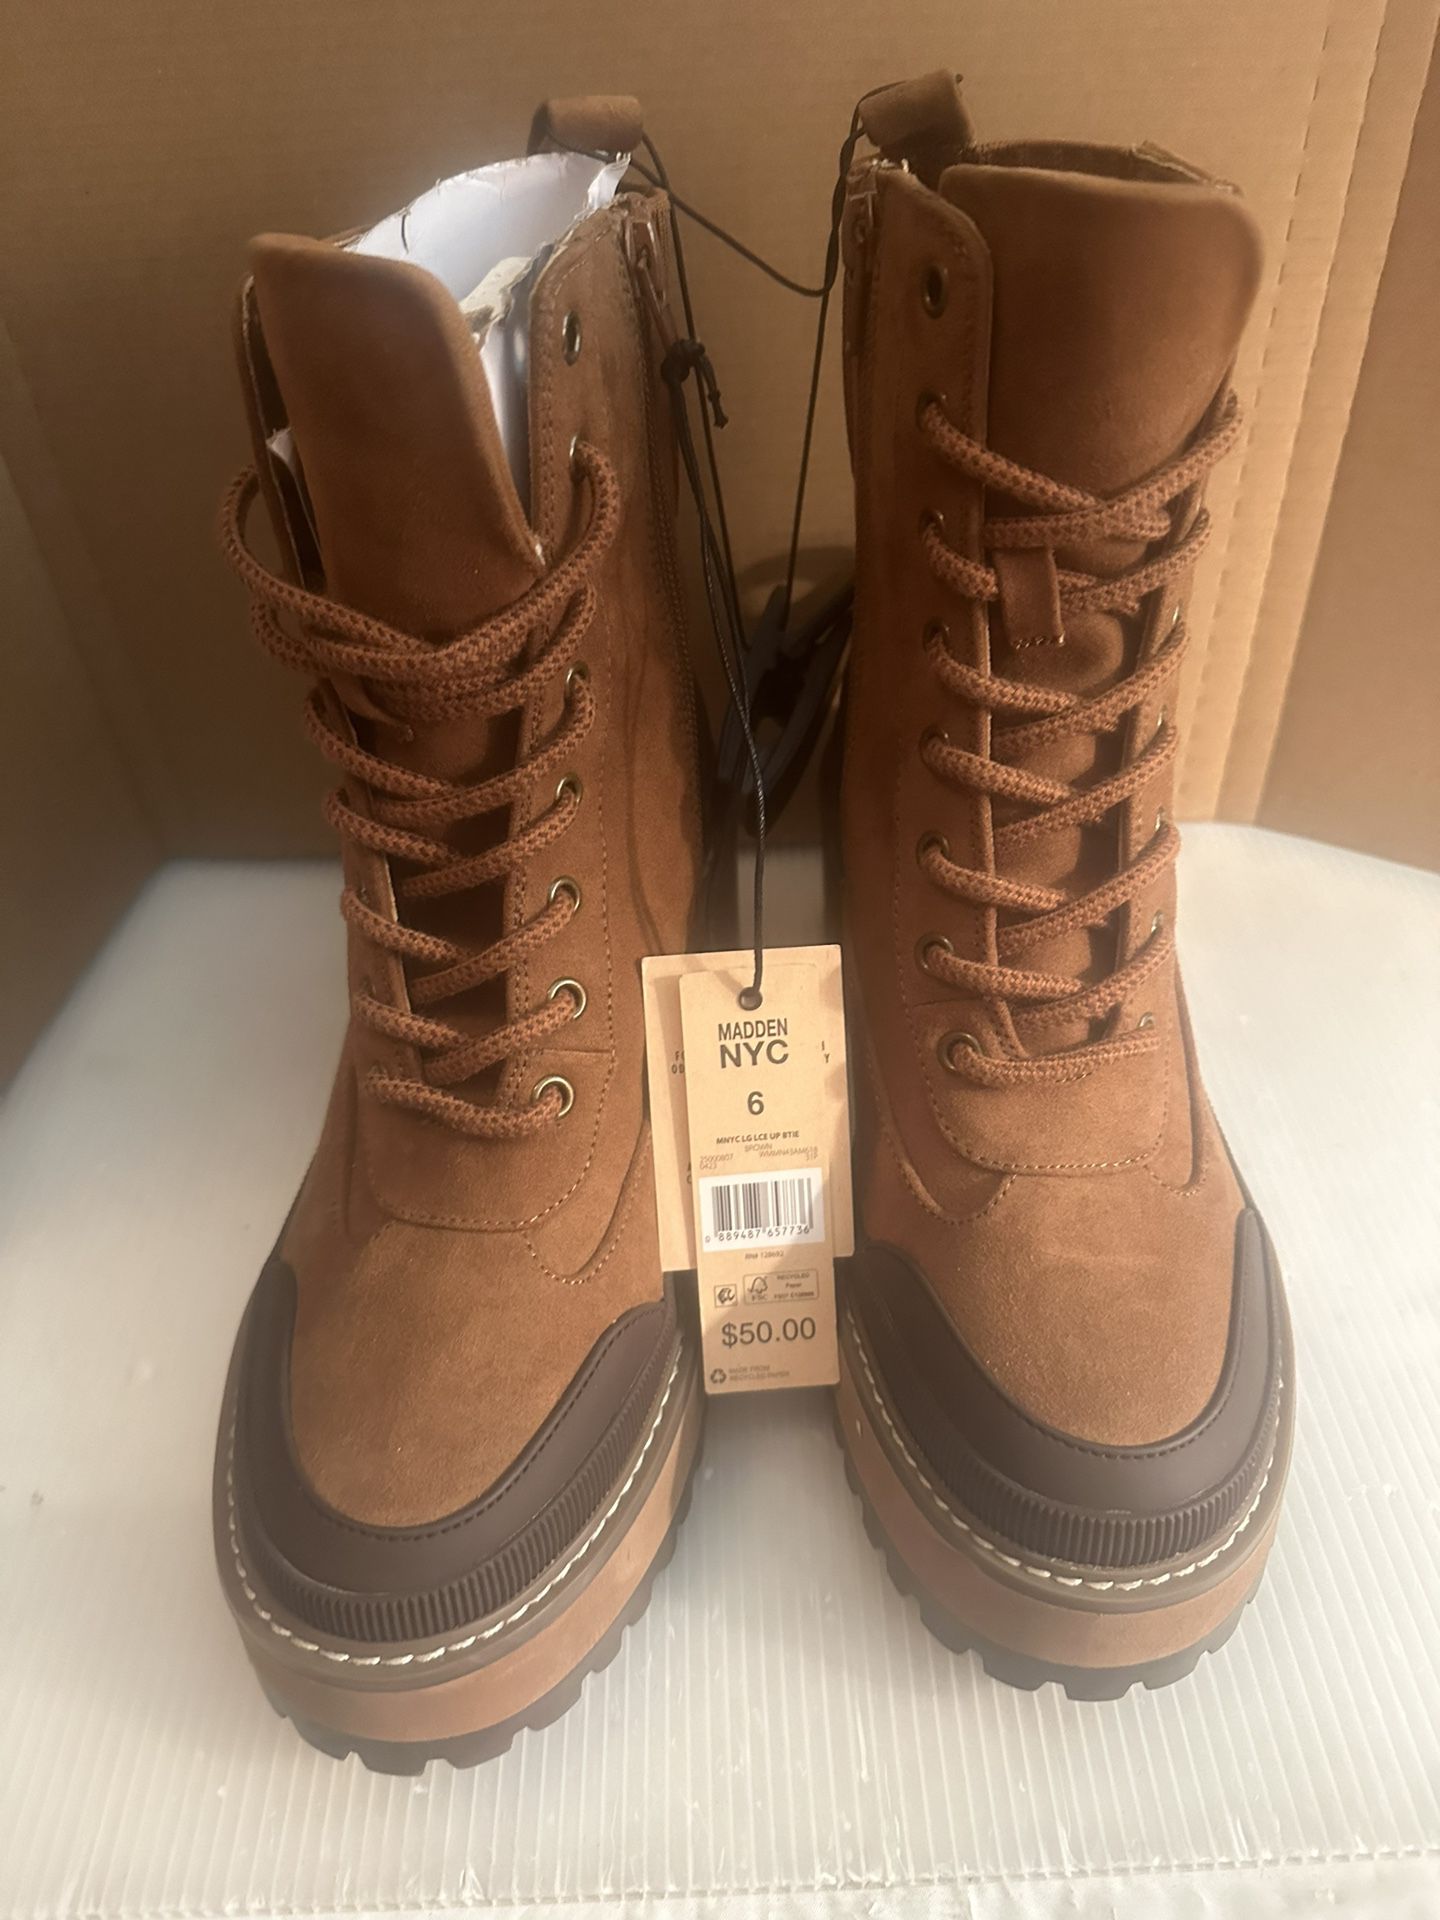 New Madden NYC  Brown Women’s Boots Size 6